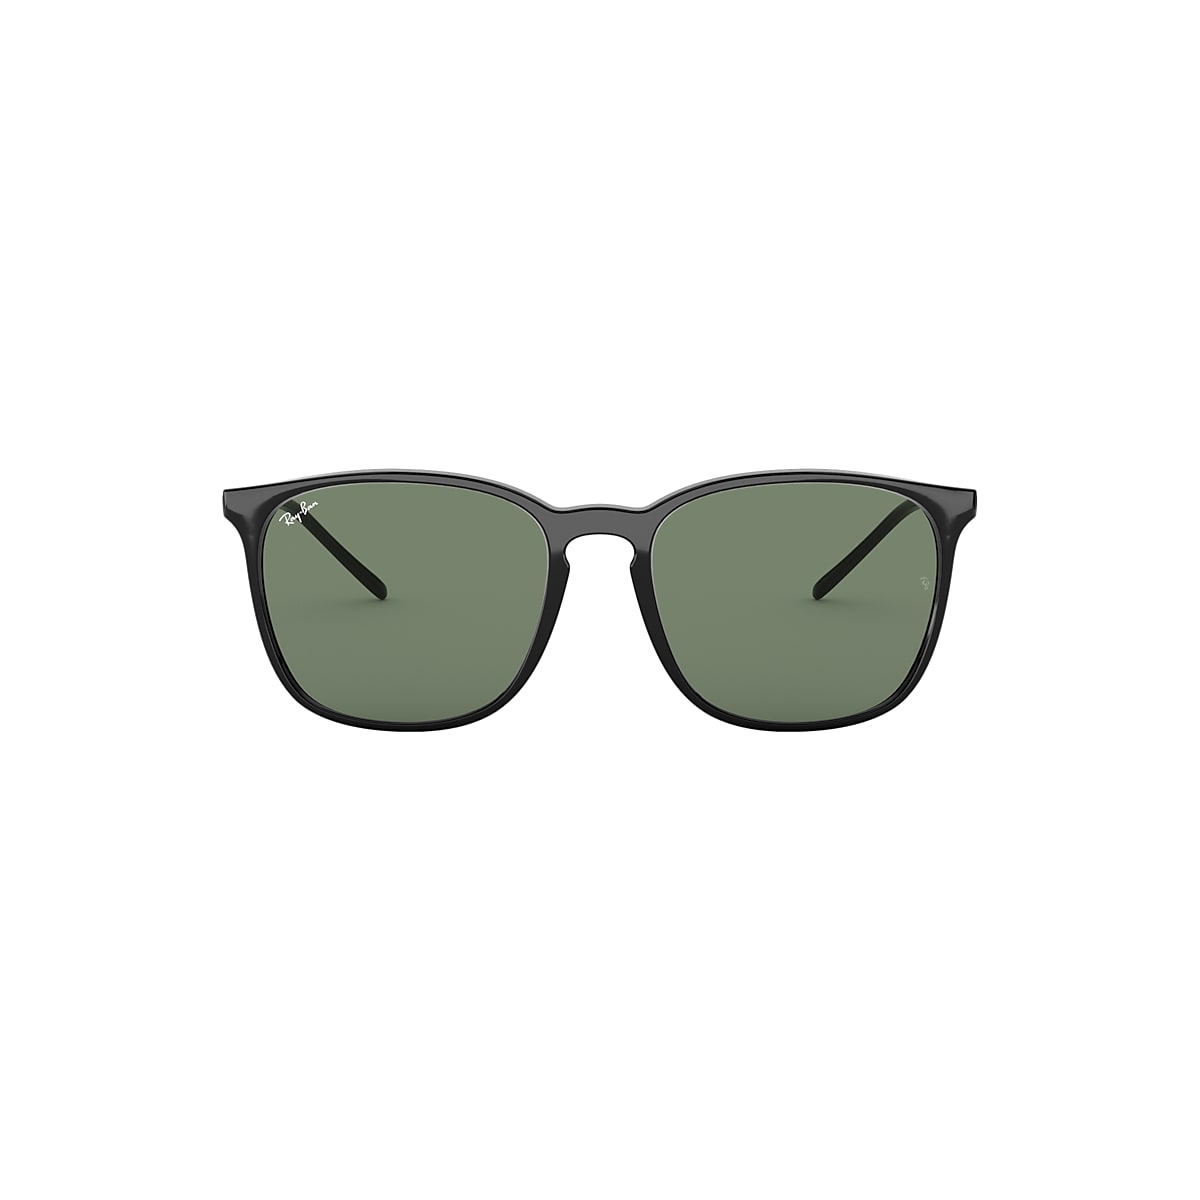 RB4387 Sunglasses in Black and Green - RB4387F | Ray-Ban® US